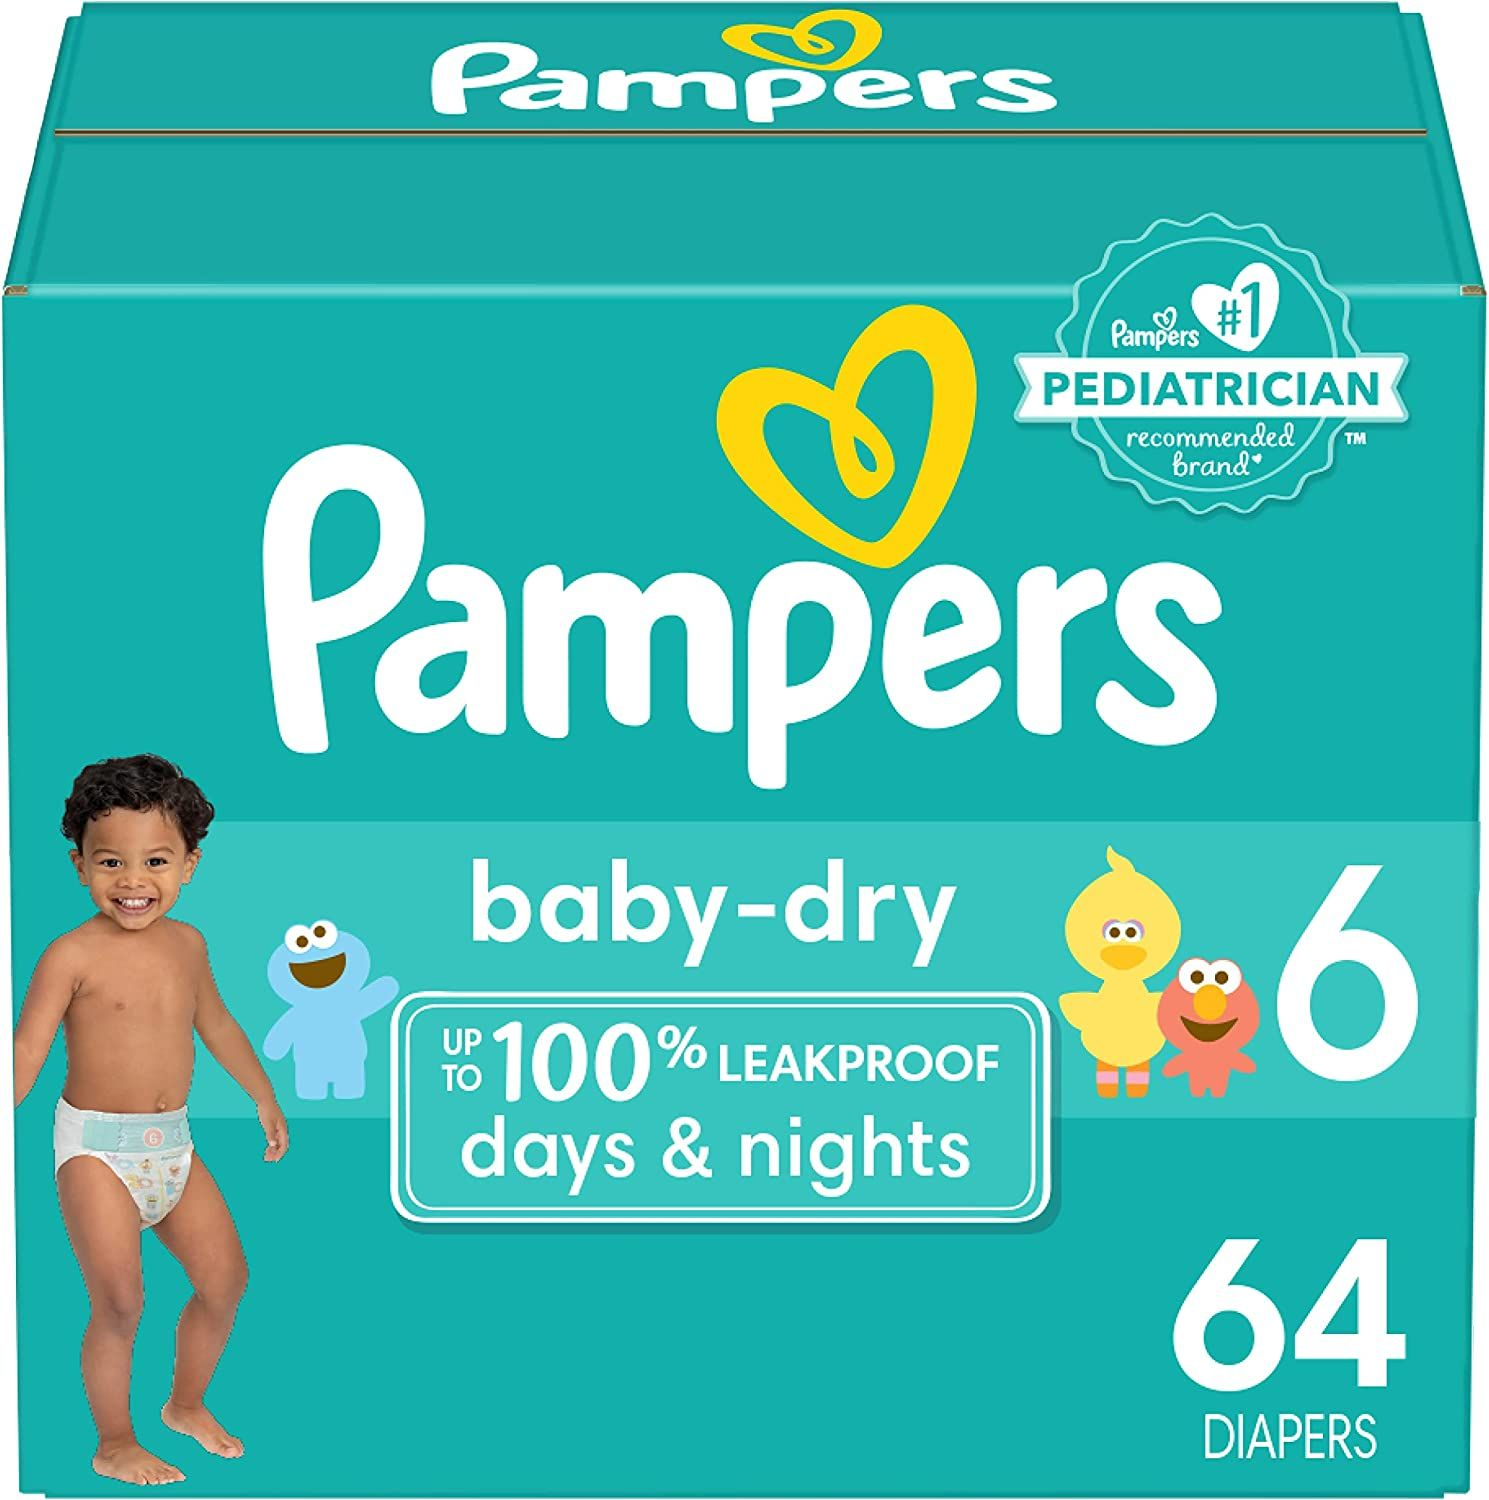 pampers 12 hour baby dry